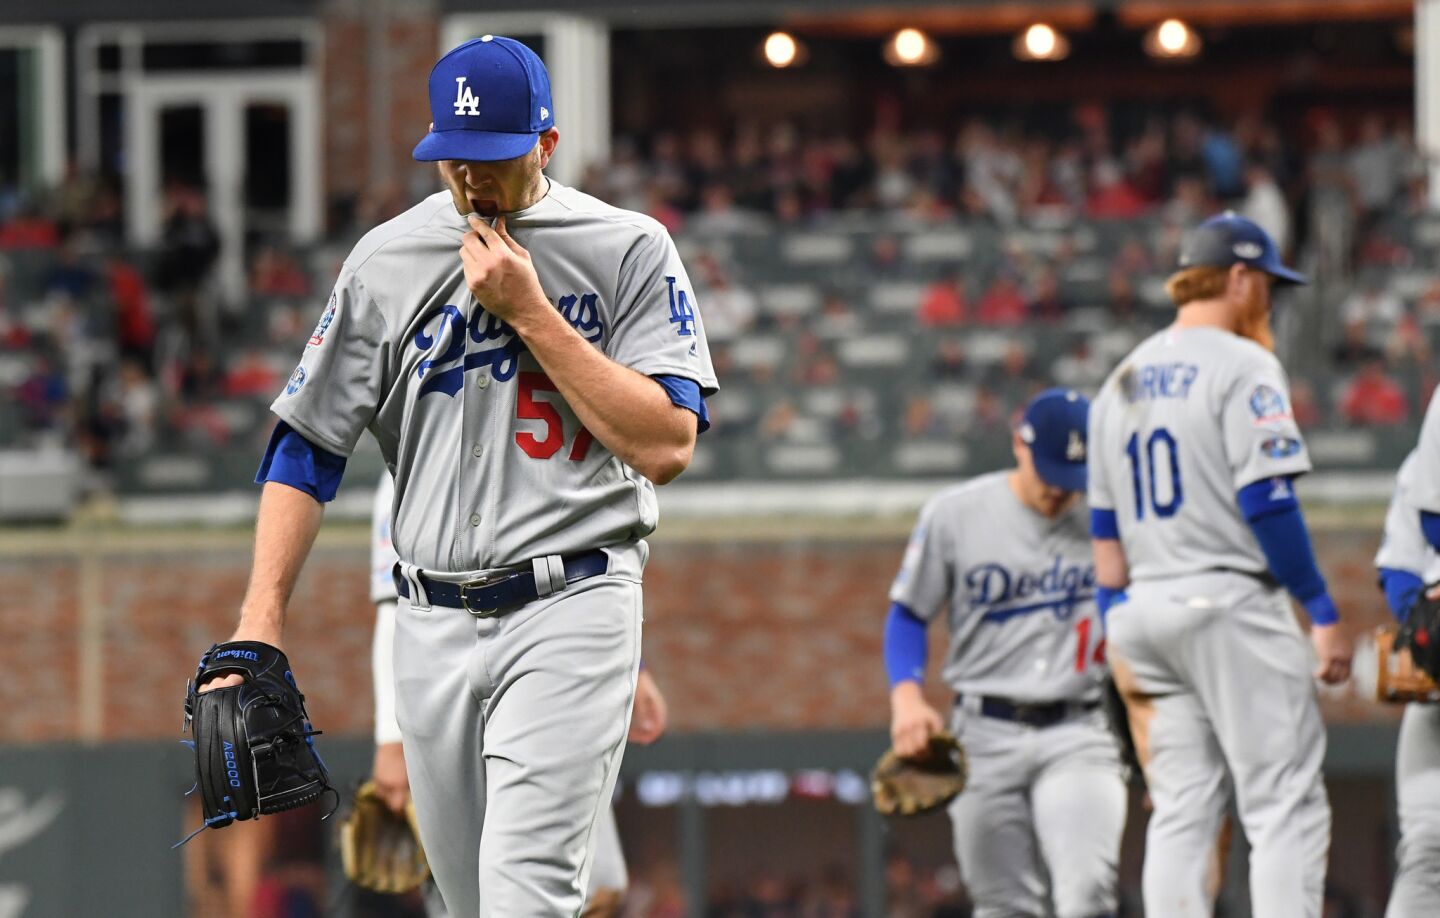 Dodgers reliever Alex Wood comes out of the game after giving up the go-ahead run to the Braves in the 6th inning.